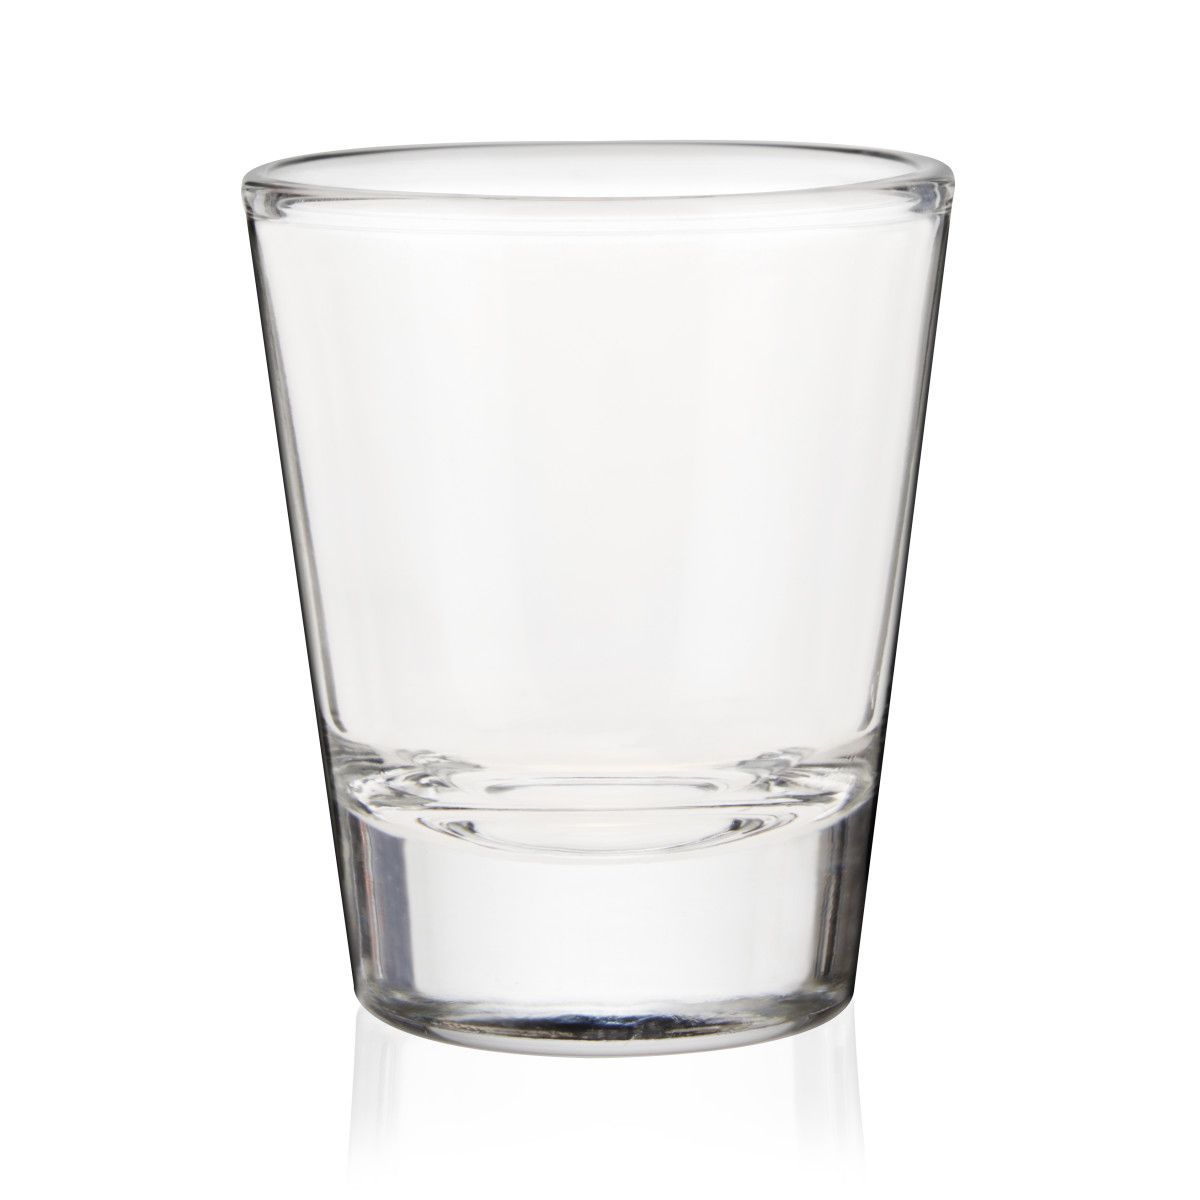 True Brands Shot Glass with Measurements